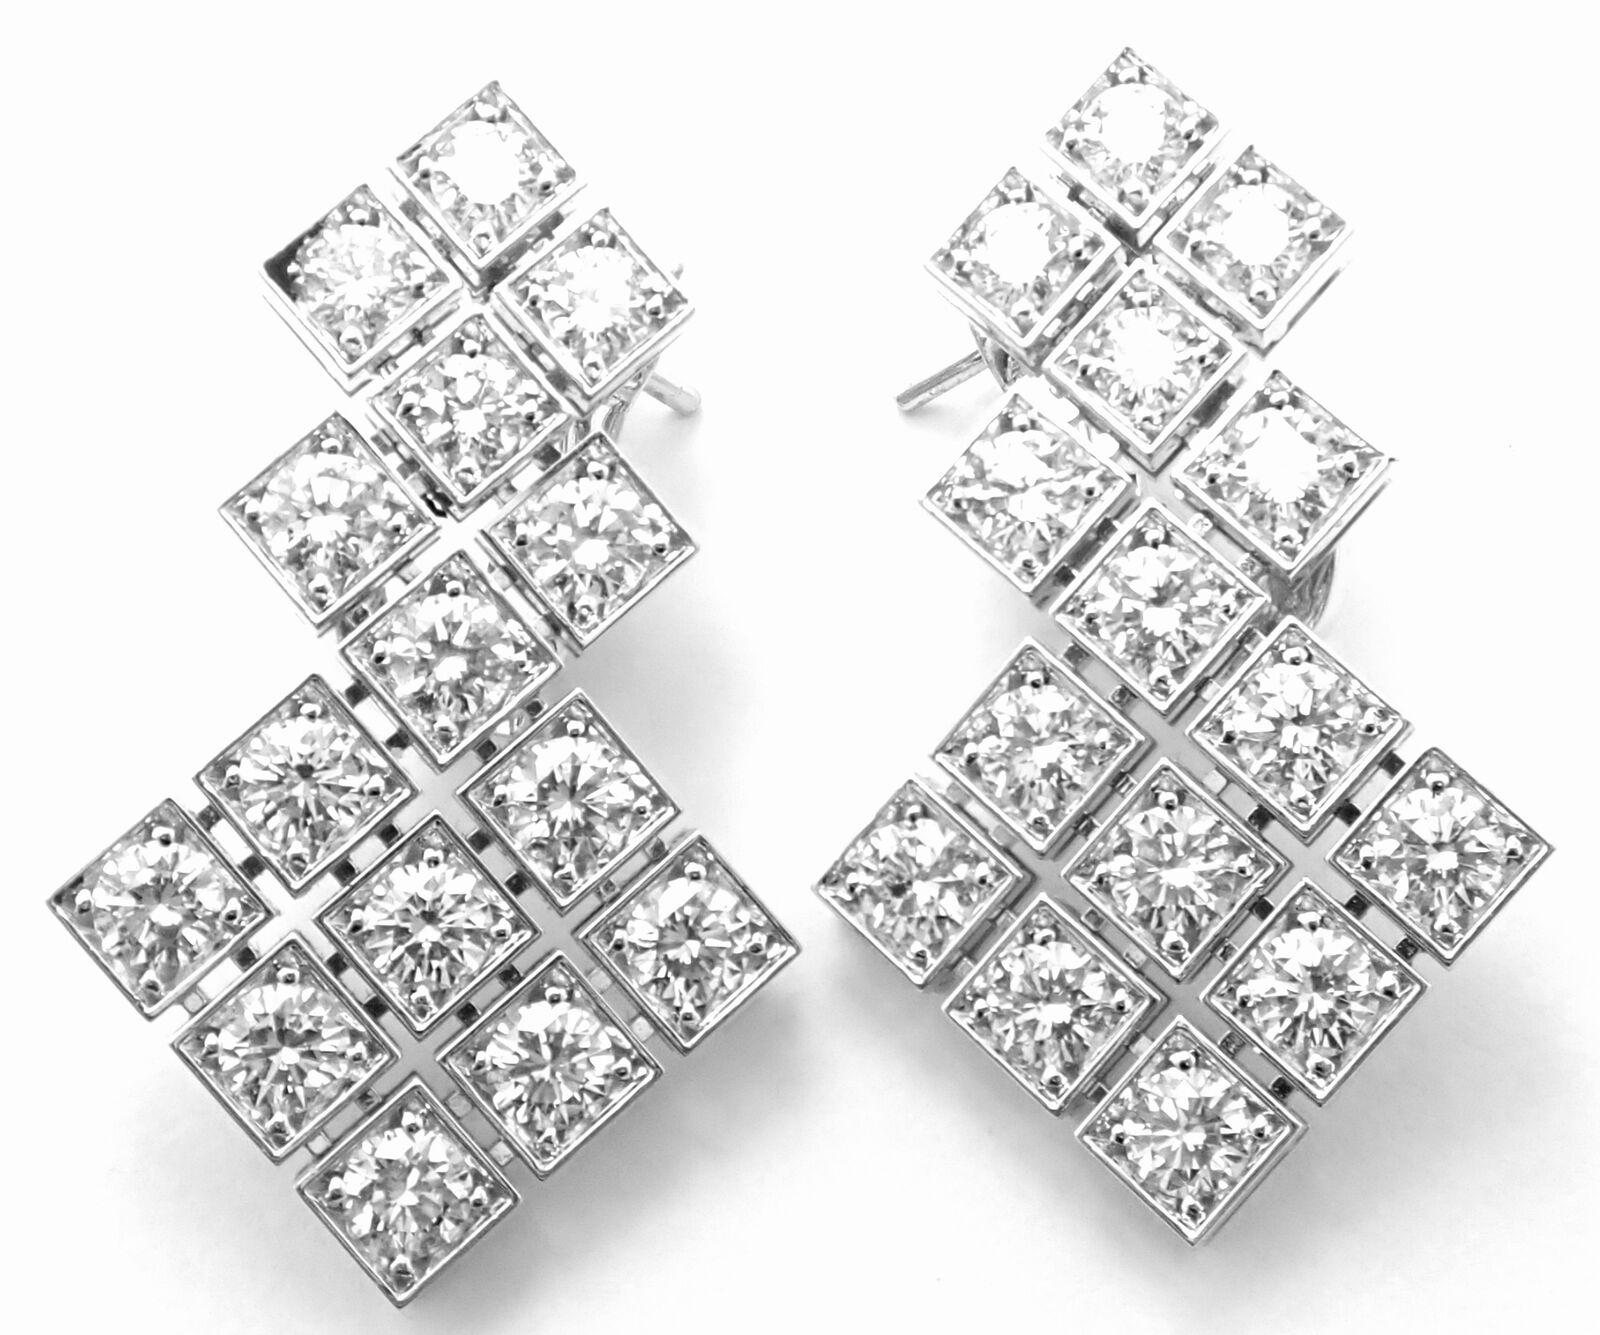 18k White Gold Diamond Drop Earrings by Cartier. 
With 30 round brilliant cut diamonds VVS1 clarity, E color total weight approximately 4.5ct
These earrings are in mint condition and come with original Cartier box and GIA paper for one round